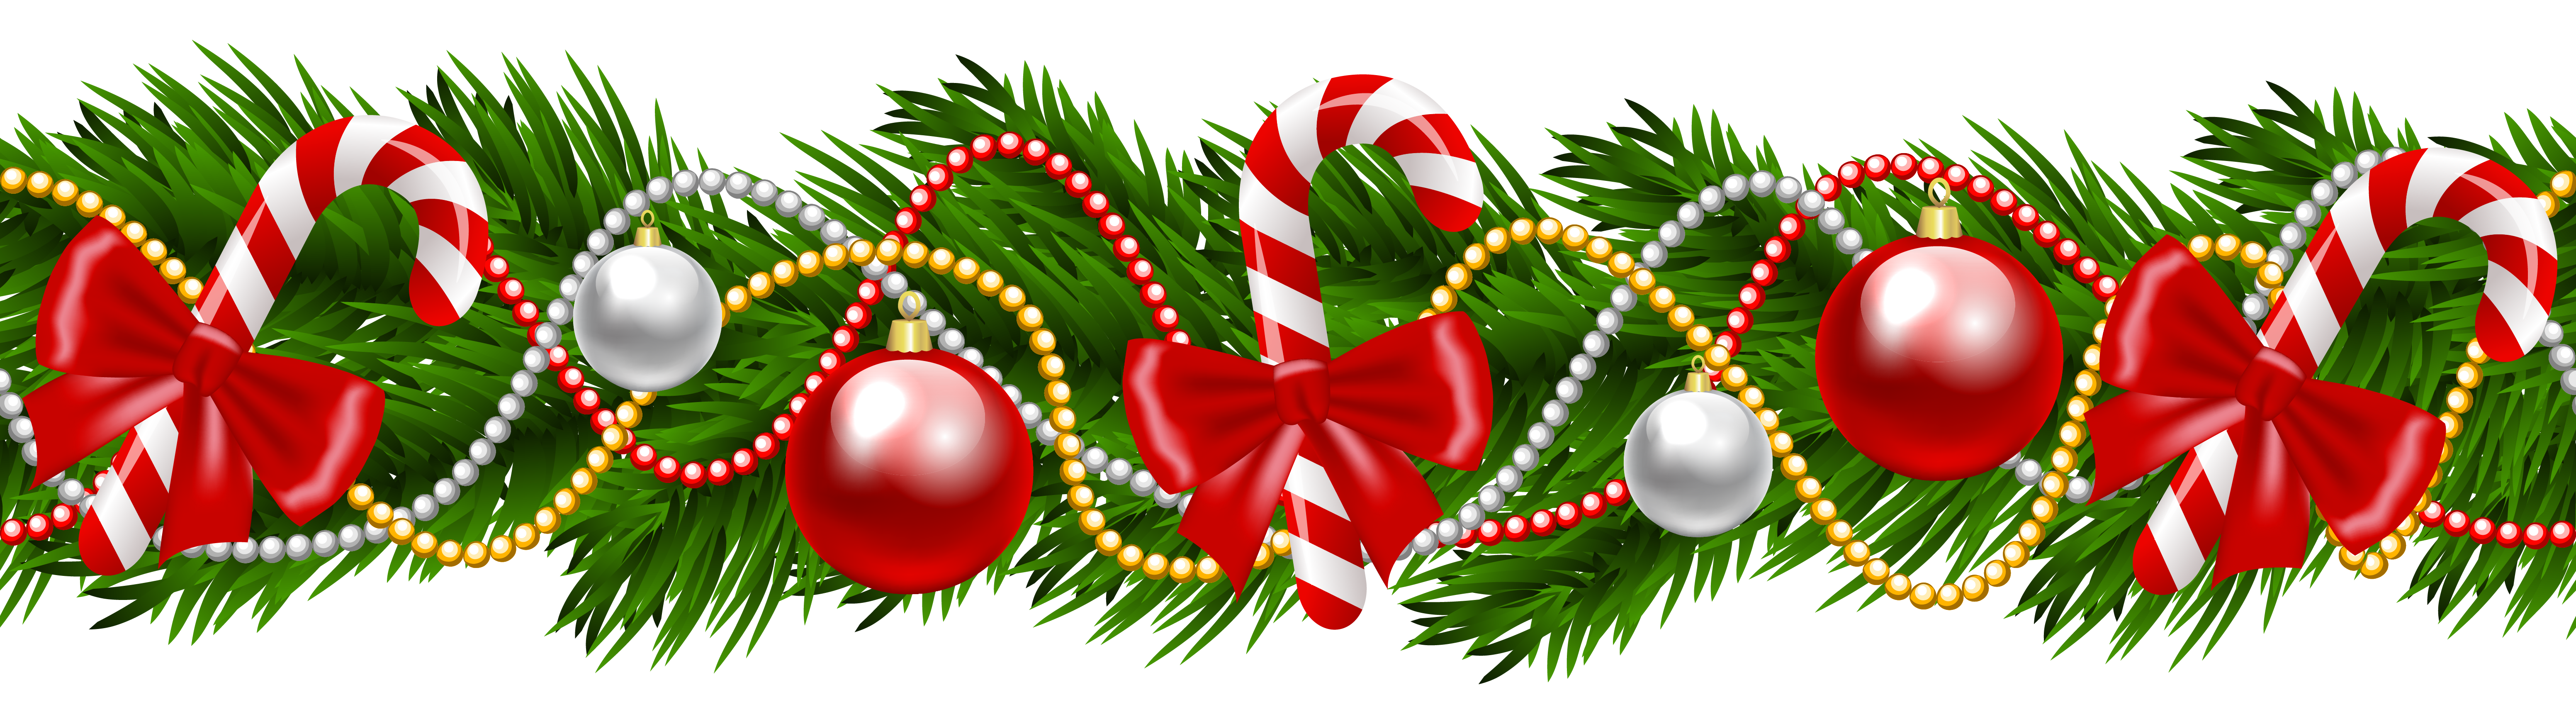 Christmas Pine Deco Garland Png Clipart Image Gallery Yopriceville High Quality Images And Transparent Png Free Clipart